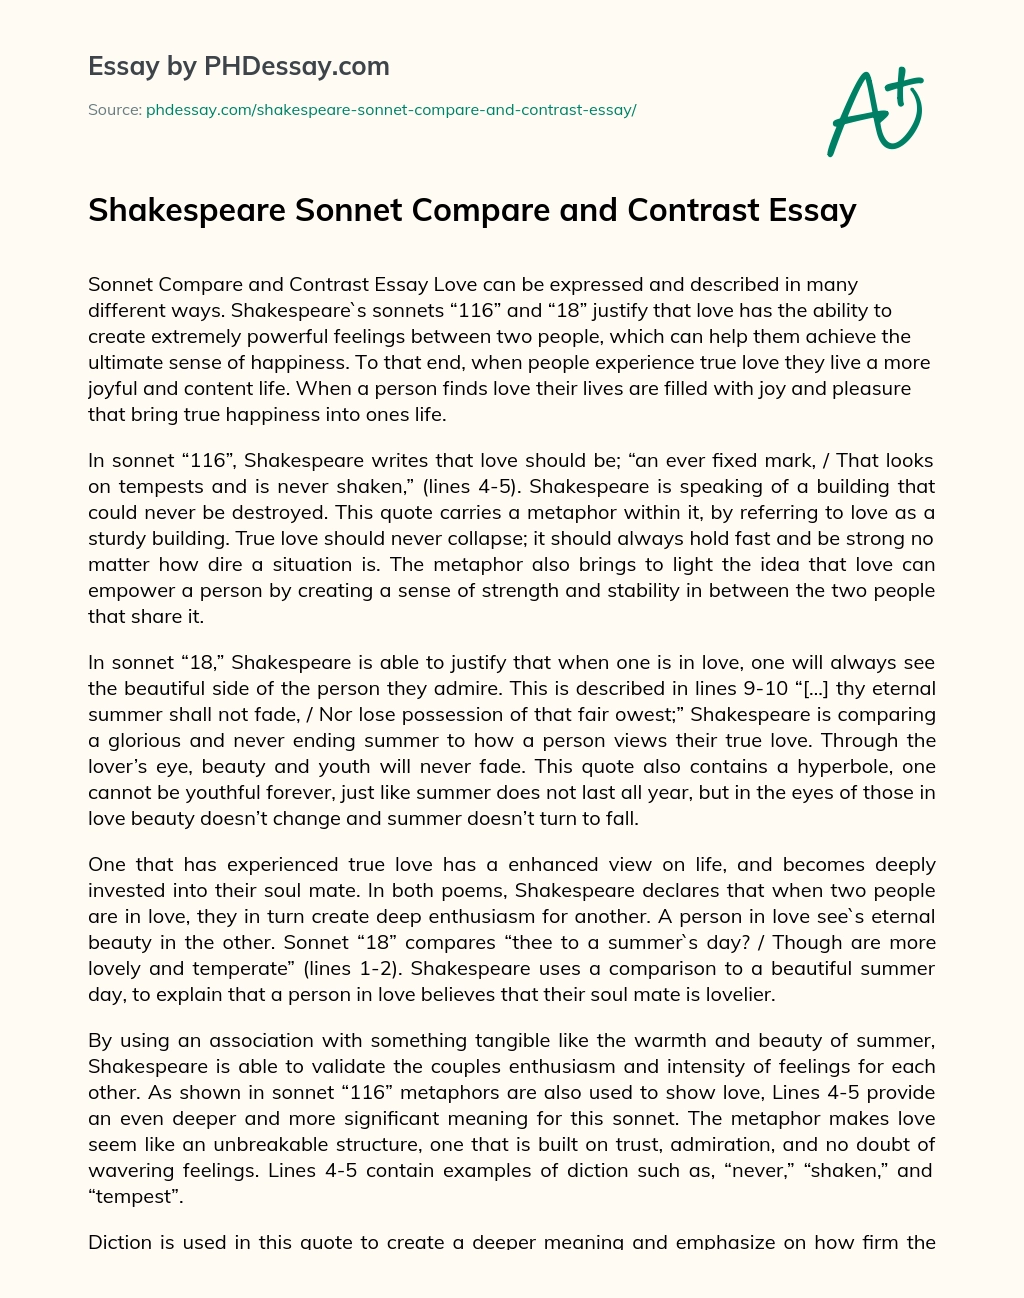 Shakespeare Sonnet Compare and Contrast Essay essay